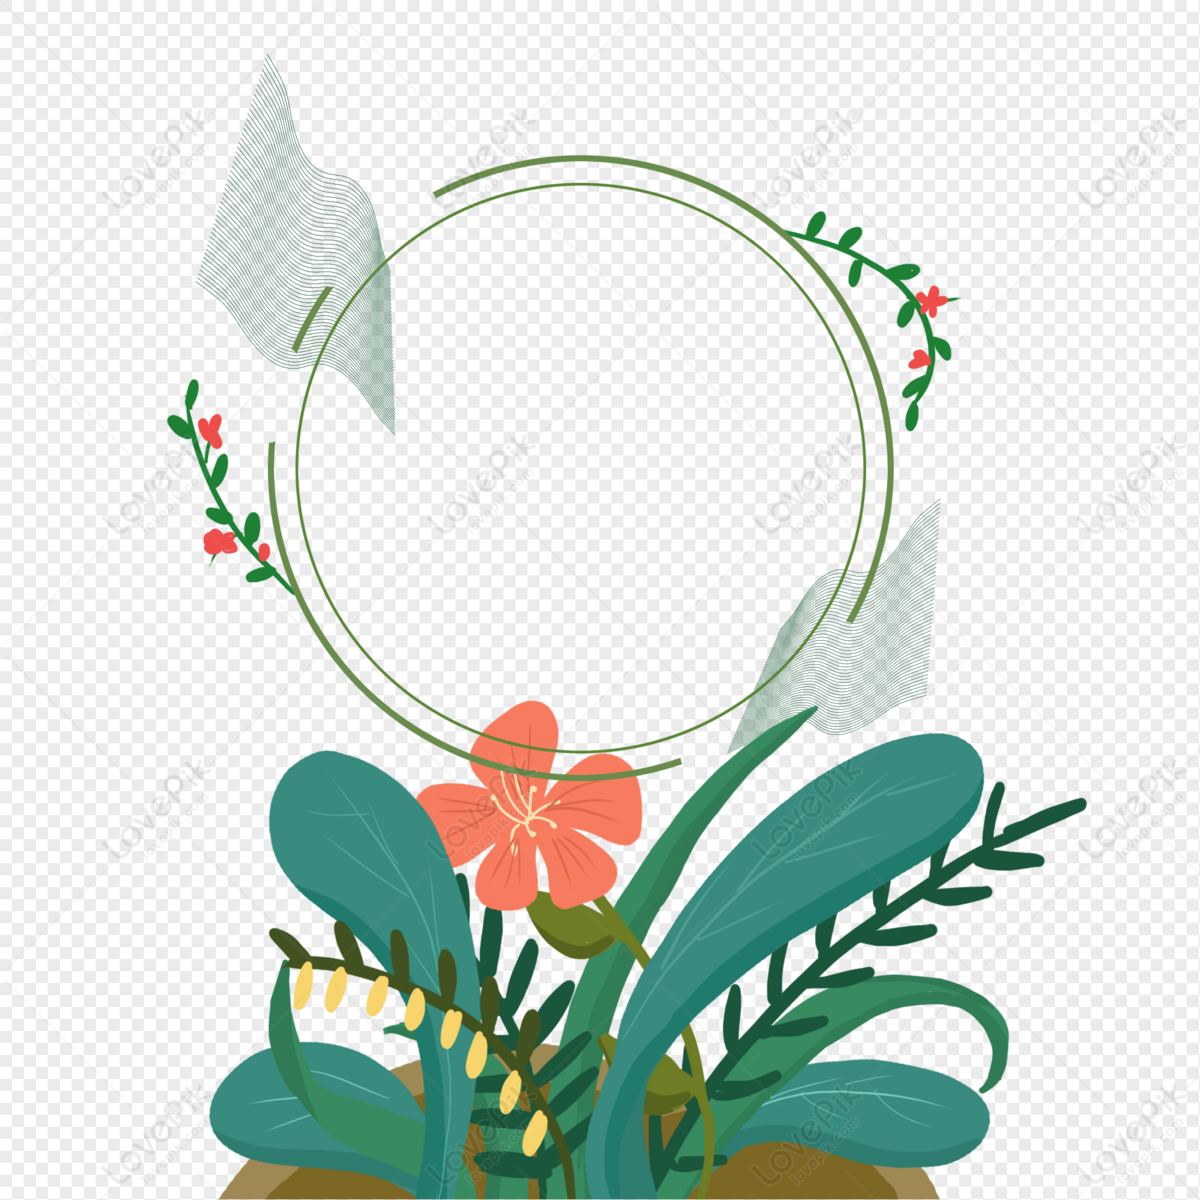 Flowers Green Border Dialog PNG Image Free Download And Clipart Image ...